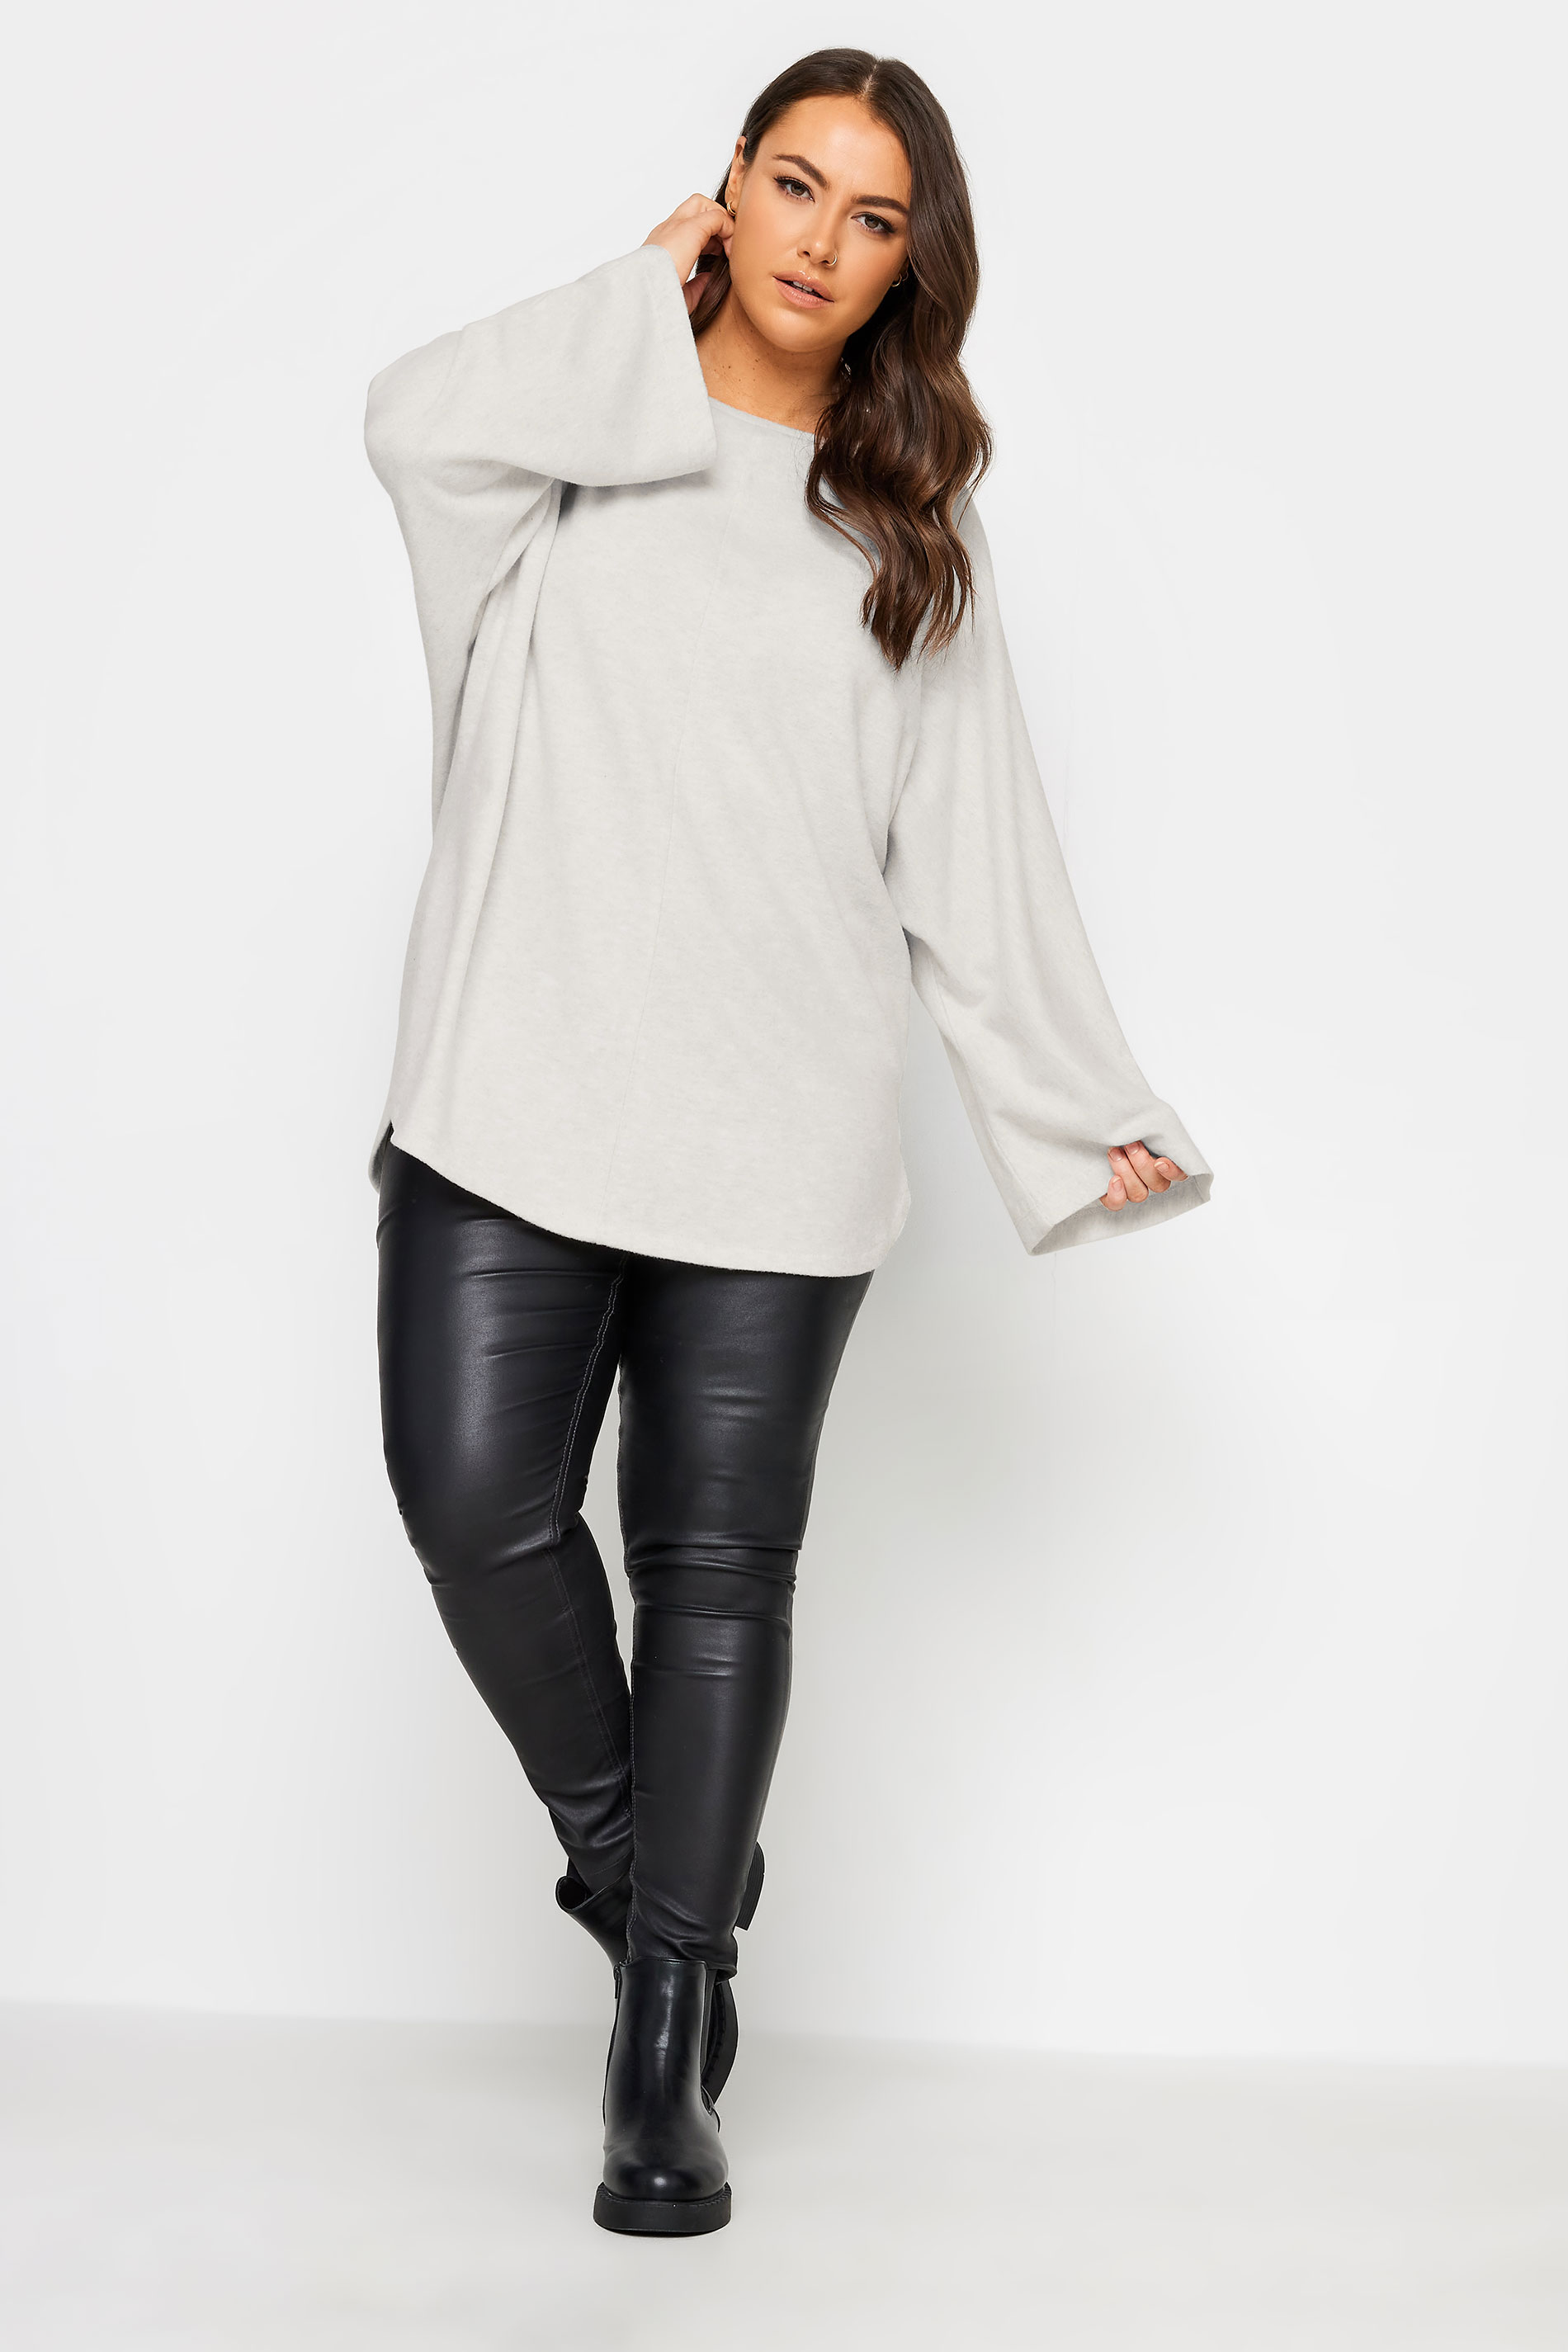 YOURS LUXURY Plus Size Cream Batwing Sleeve Jumper | Yours Clothing 2